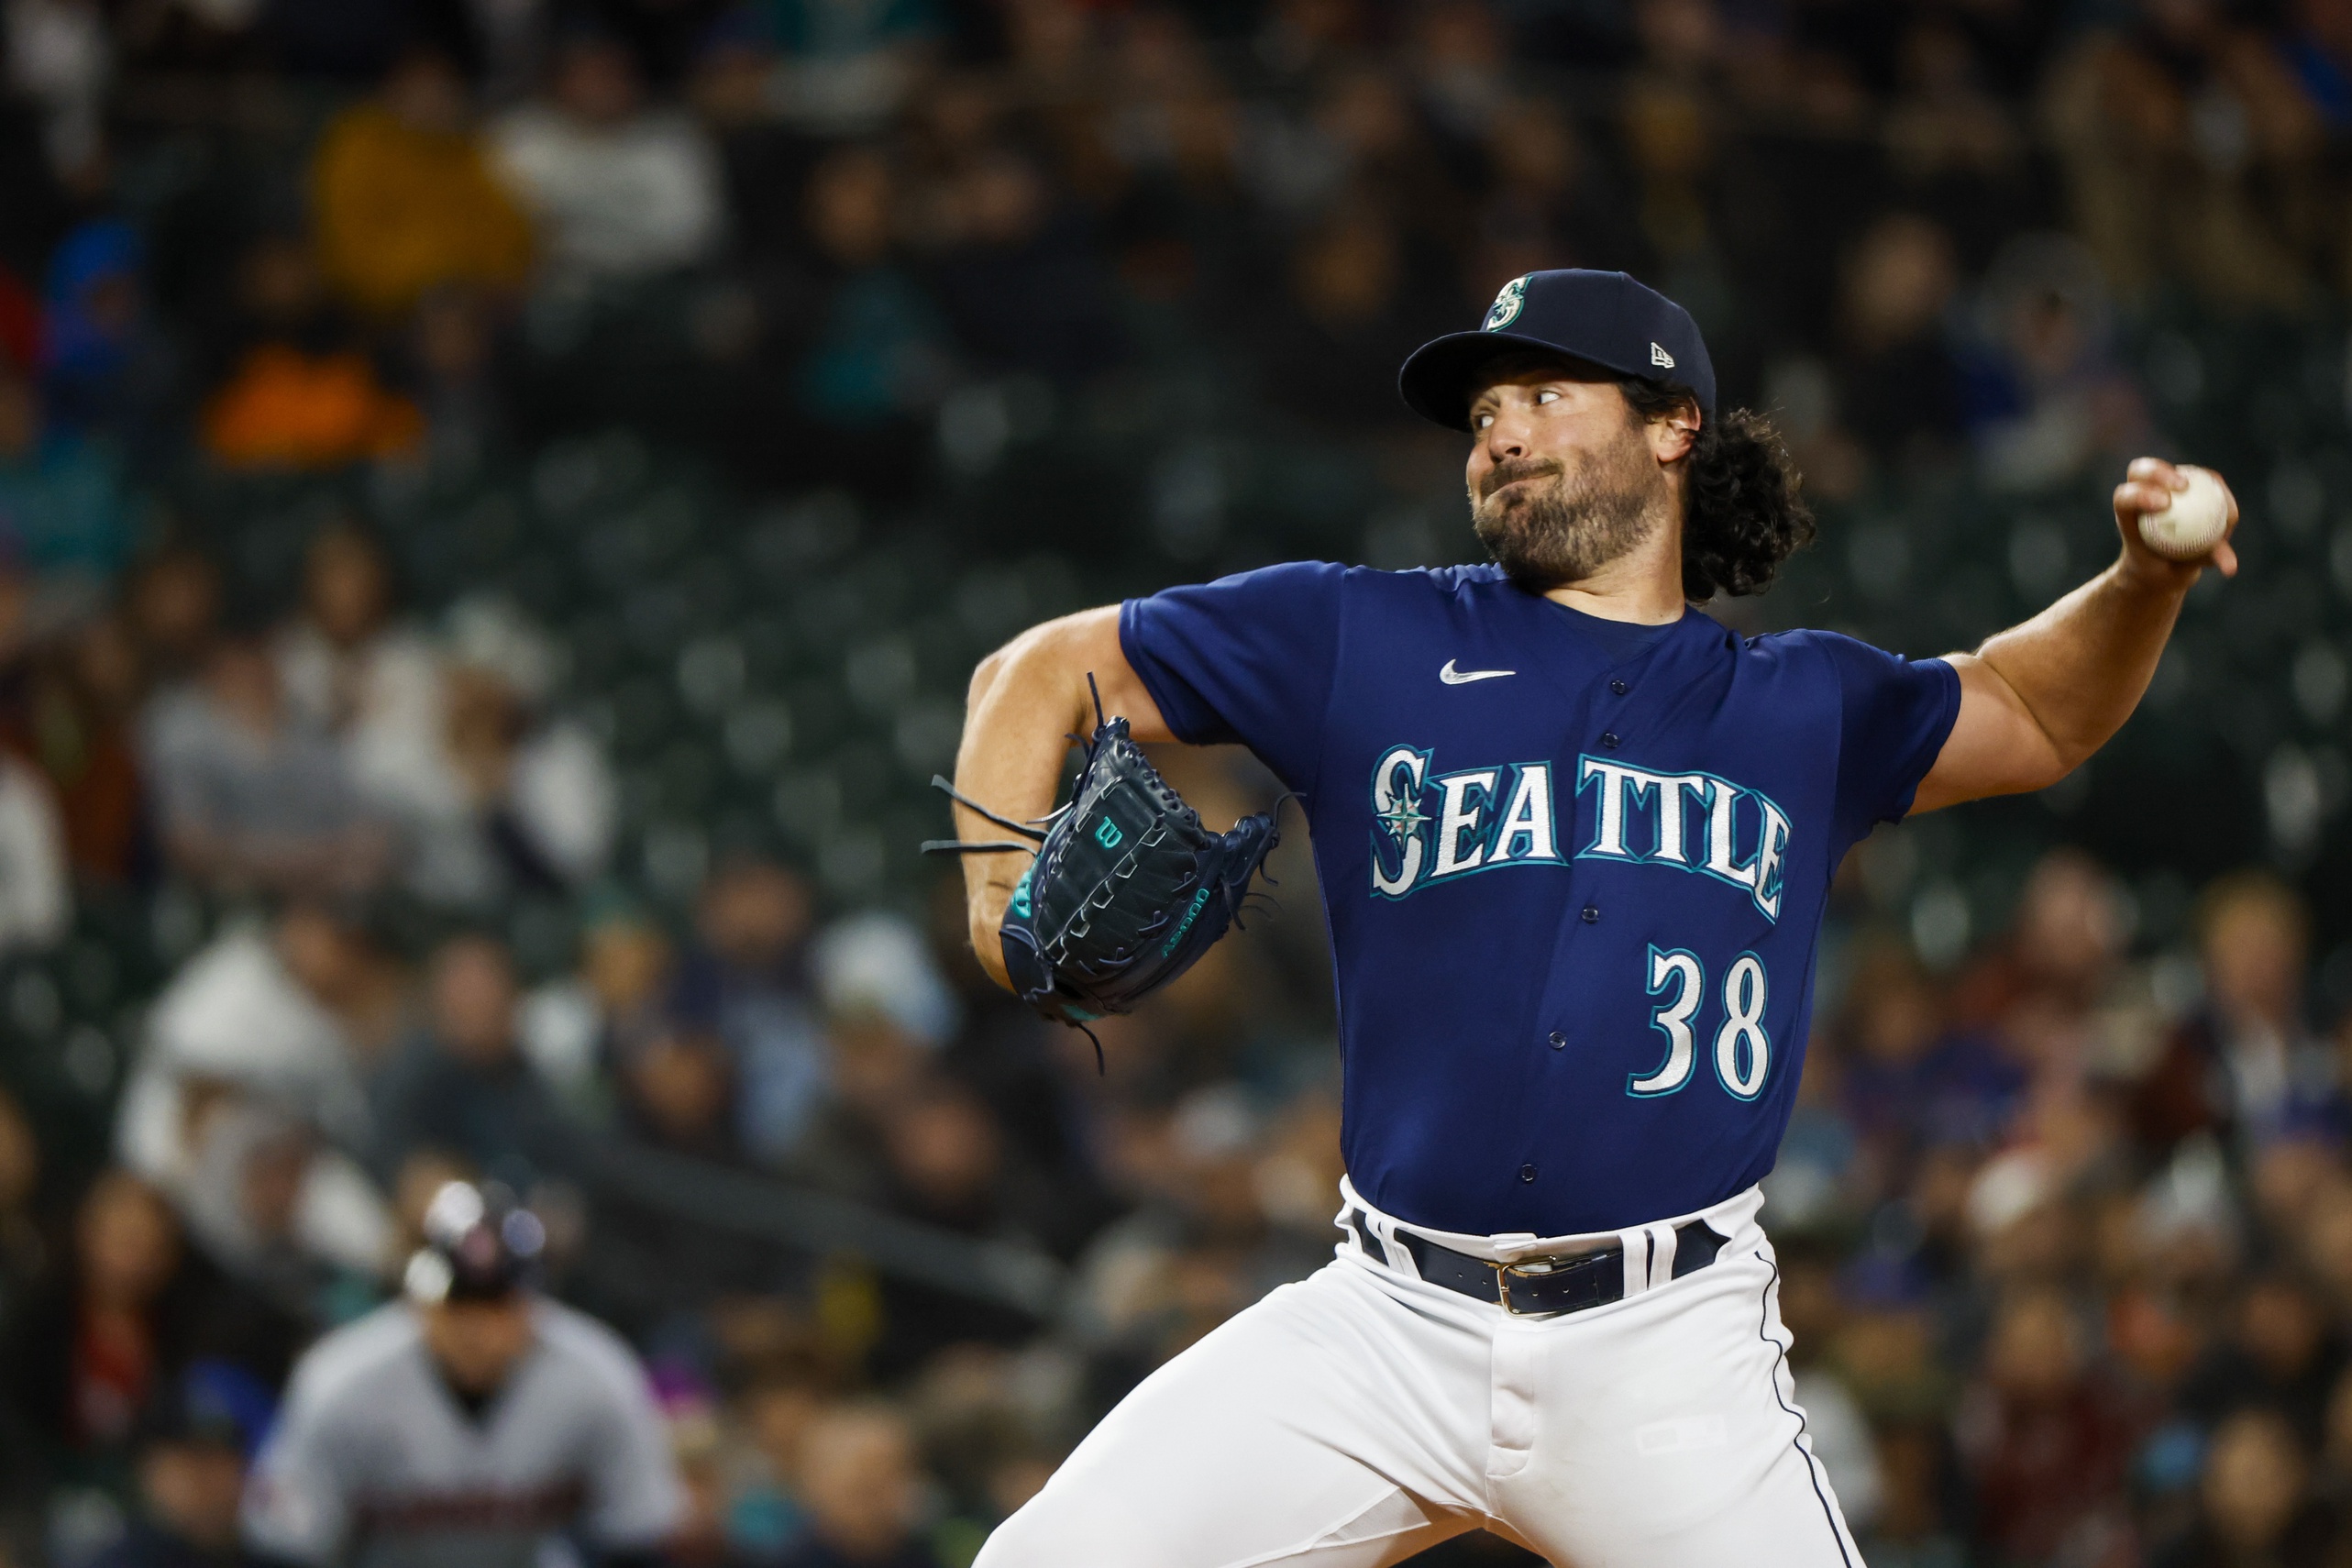 Seattle Mariners - Every day until the end of the season, the